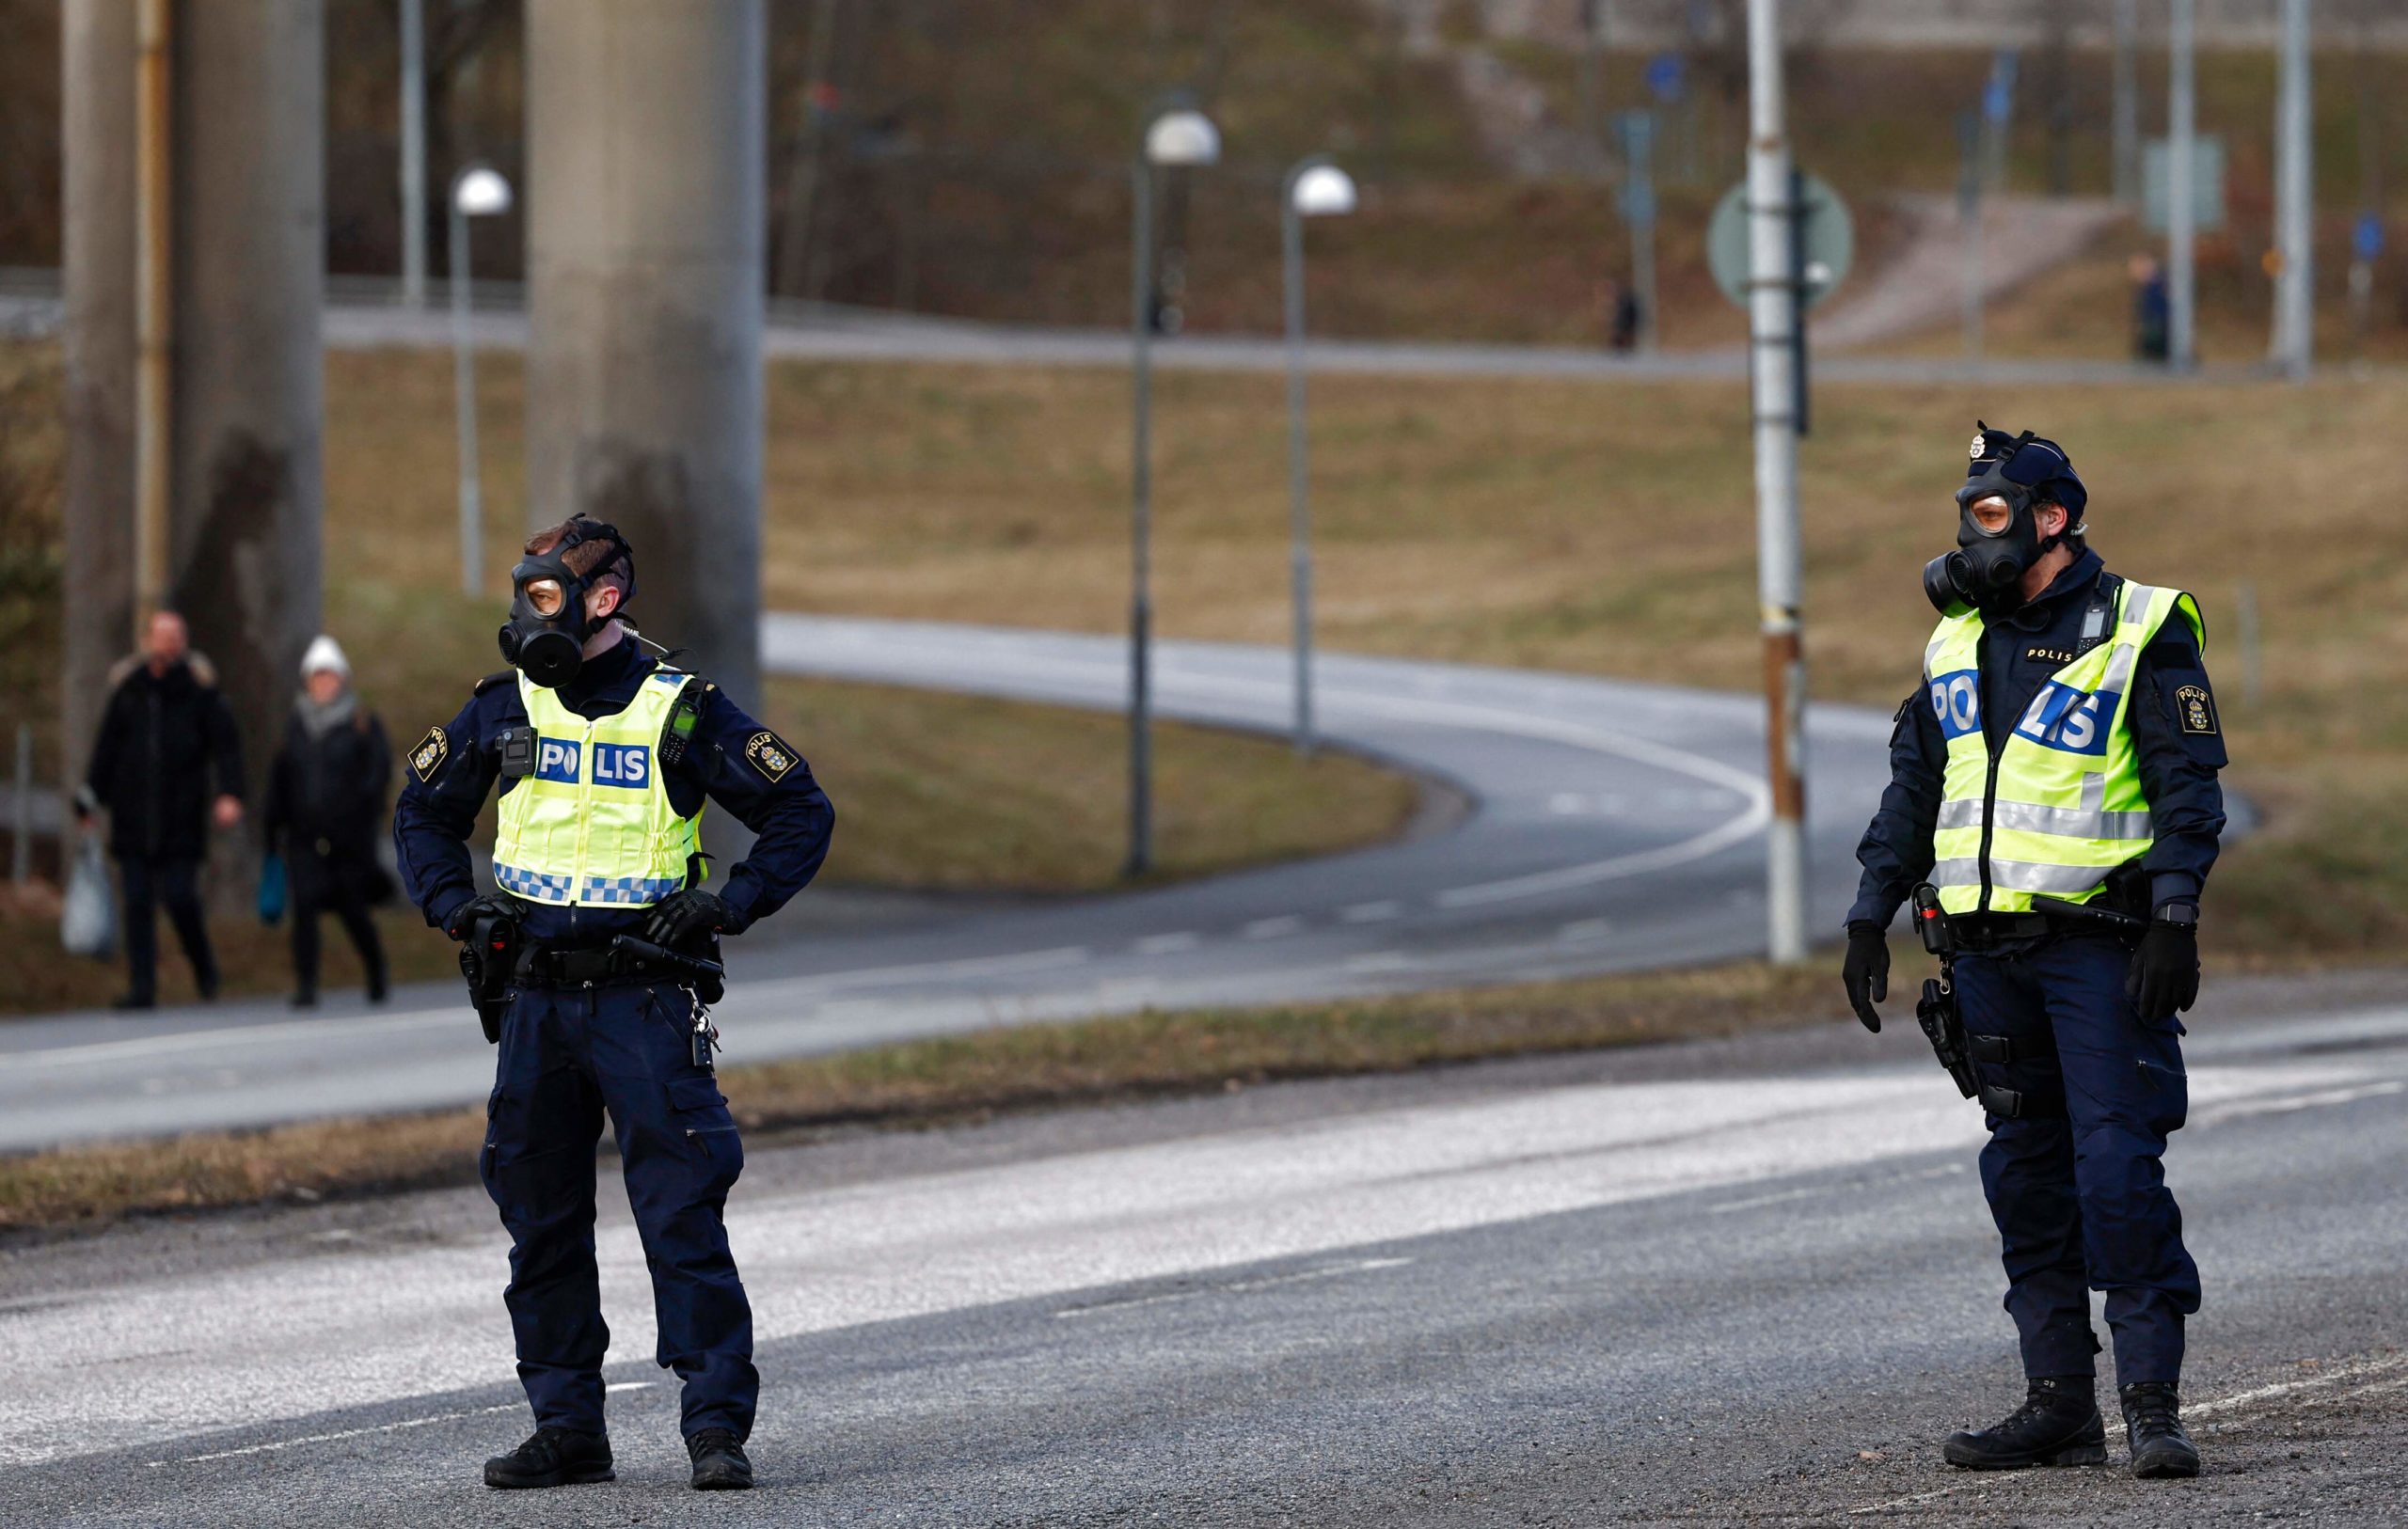 Eight hospitalised after reports of unusual smell at Sweden’s Security Service headquarters